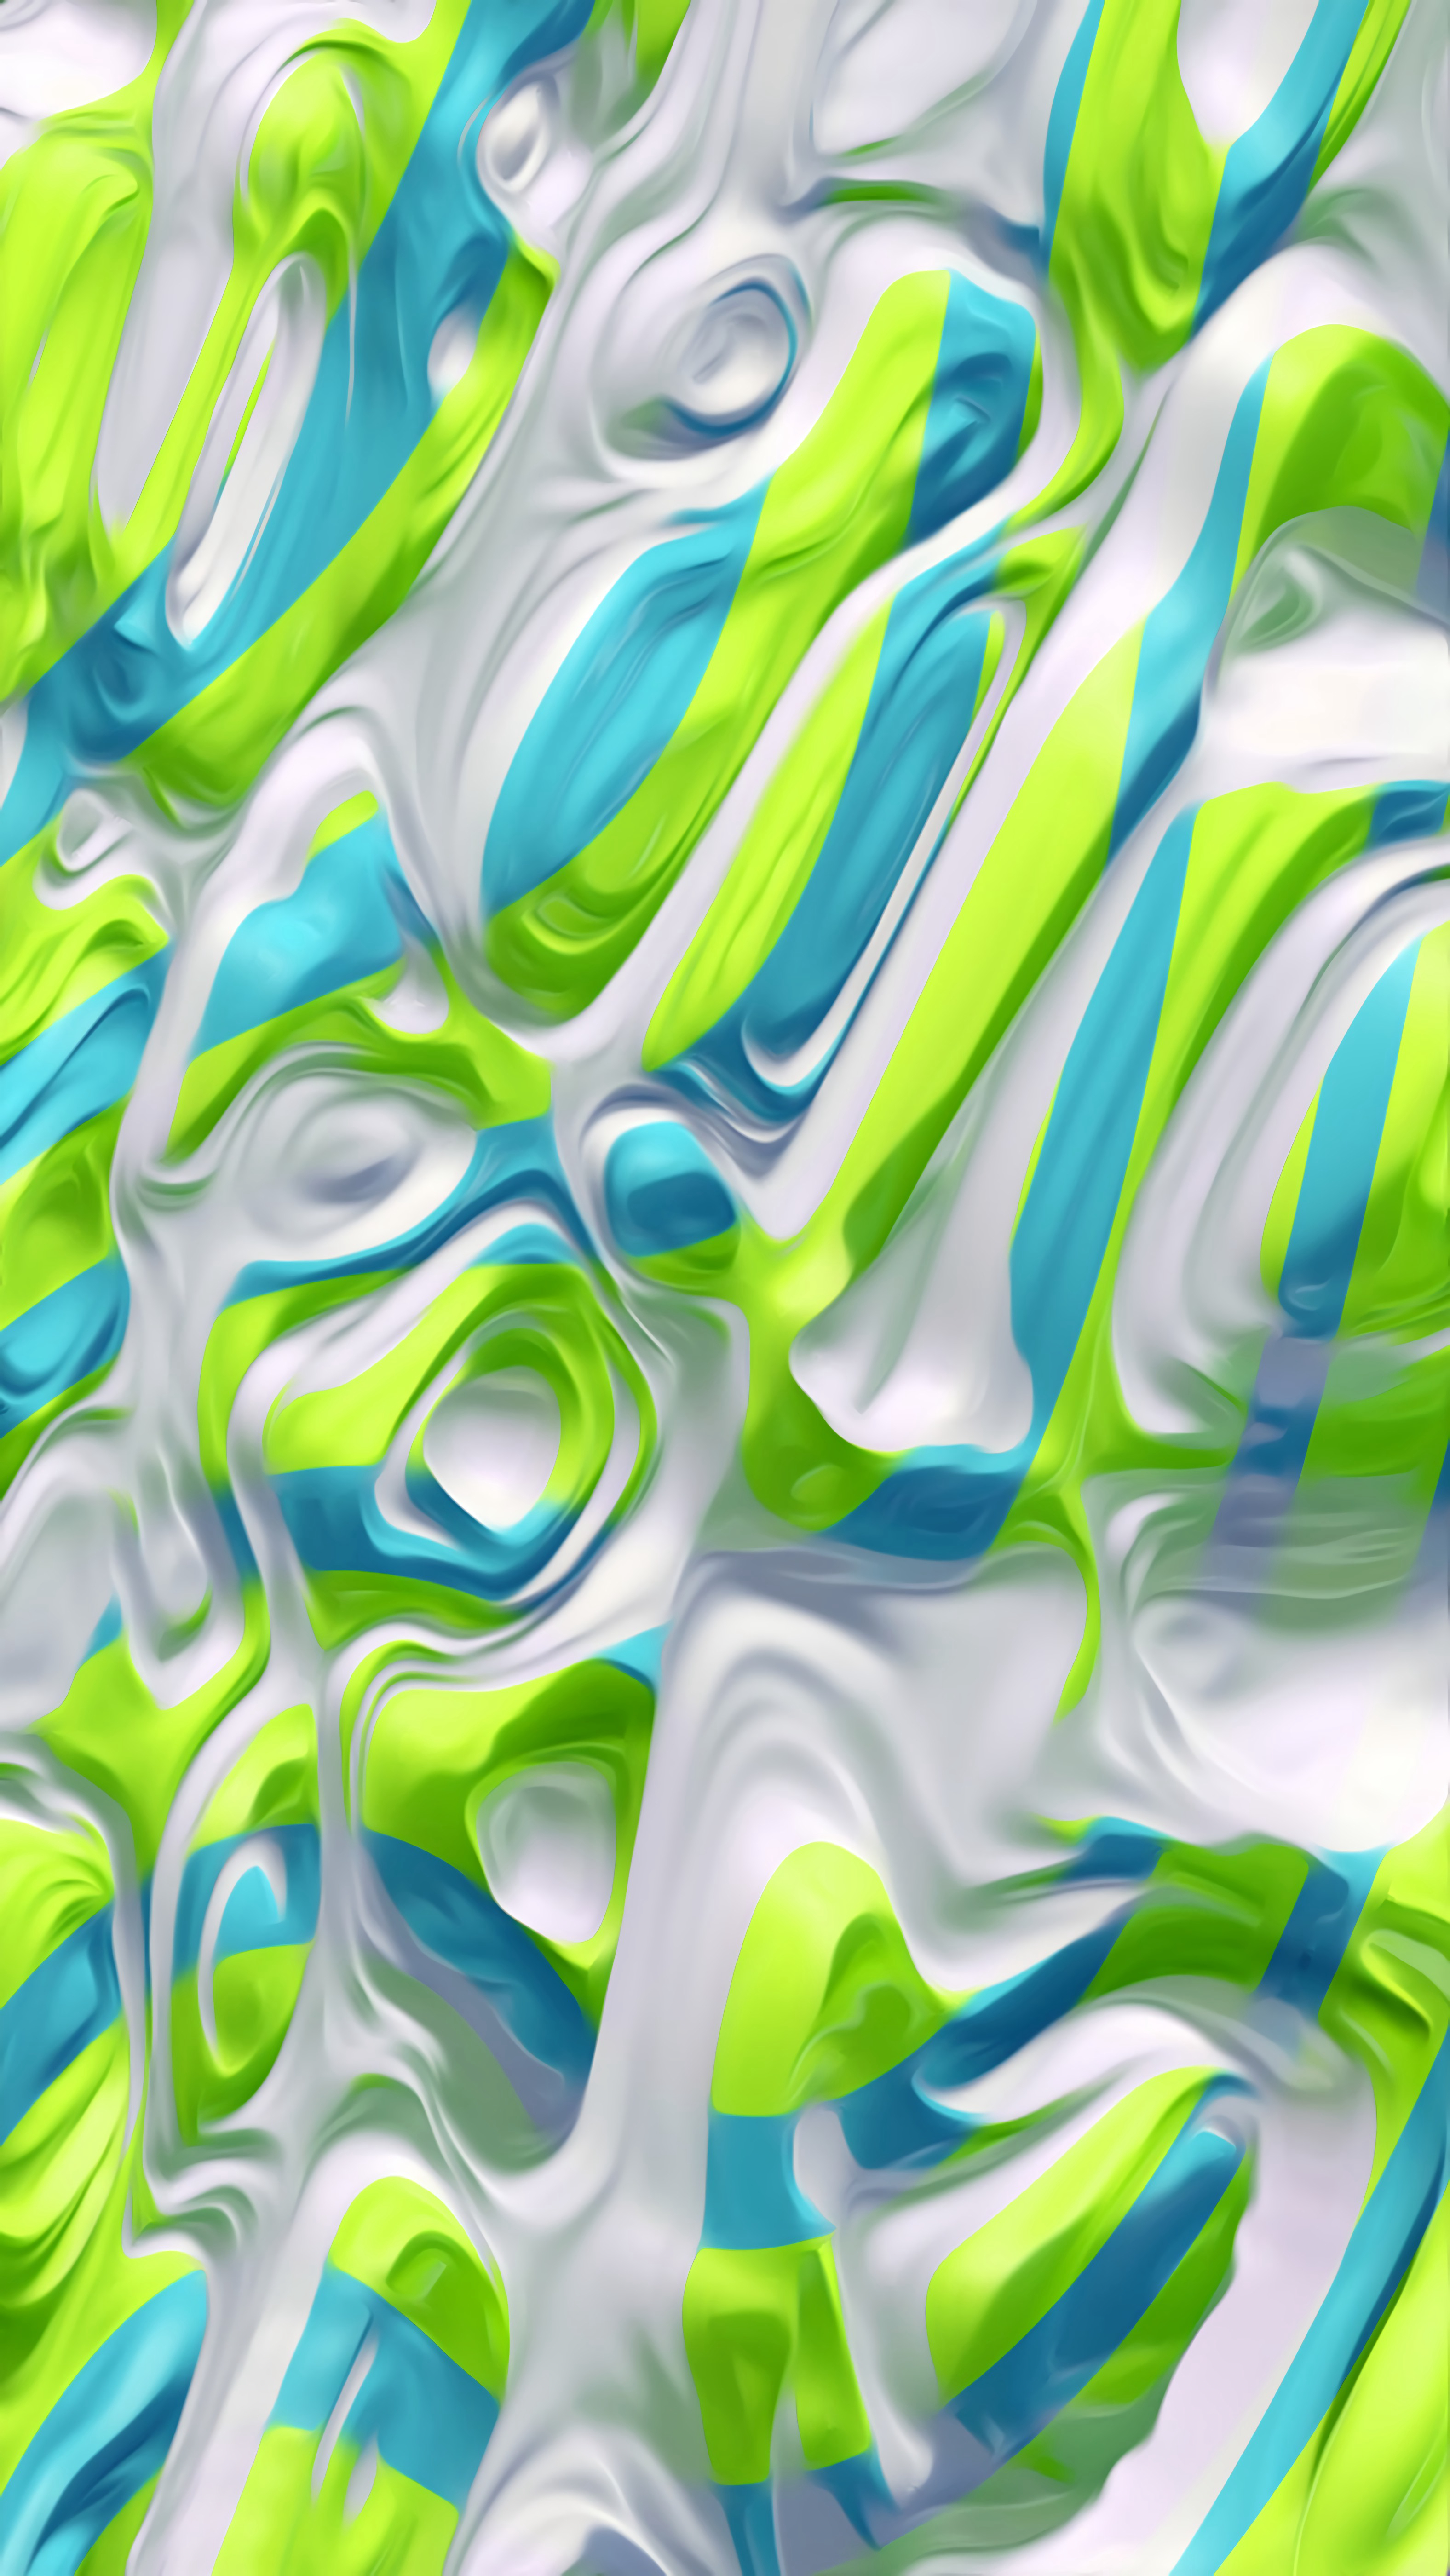 multicolored, surface, 3d, raised, bright, motley, relief, wavy, saturated